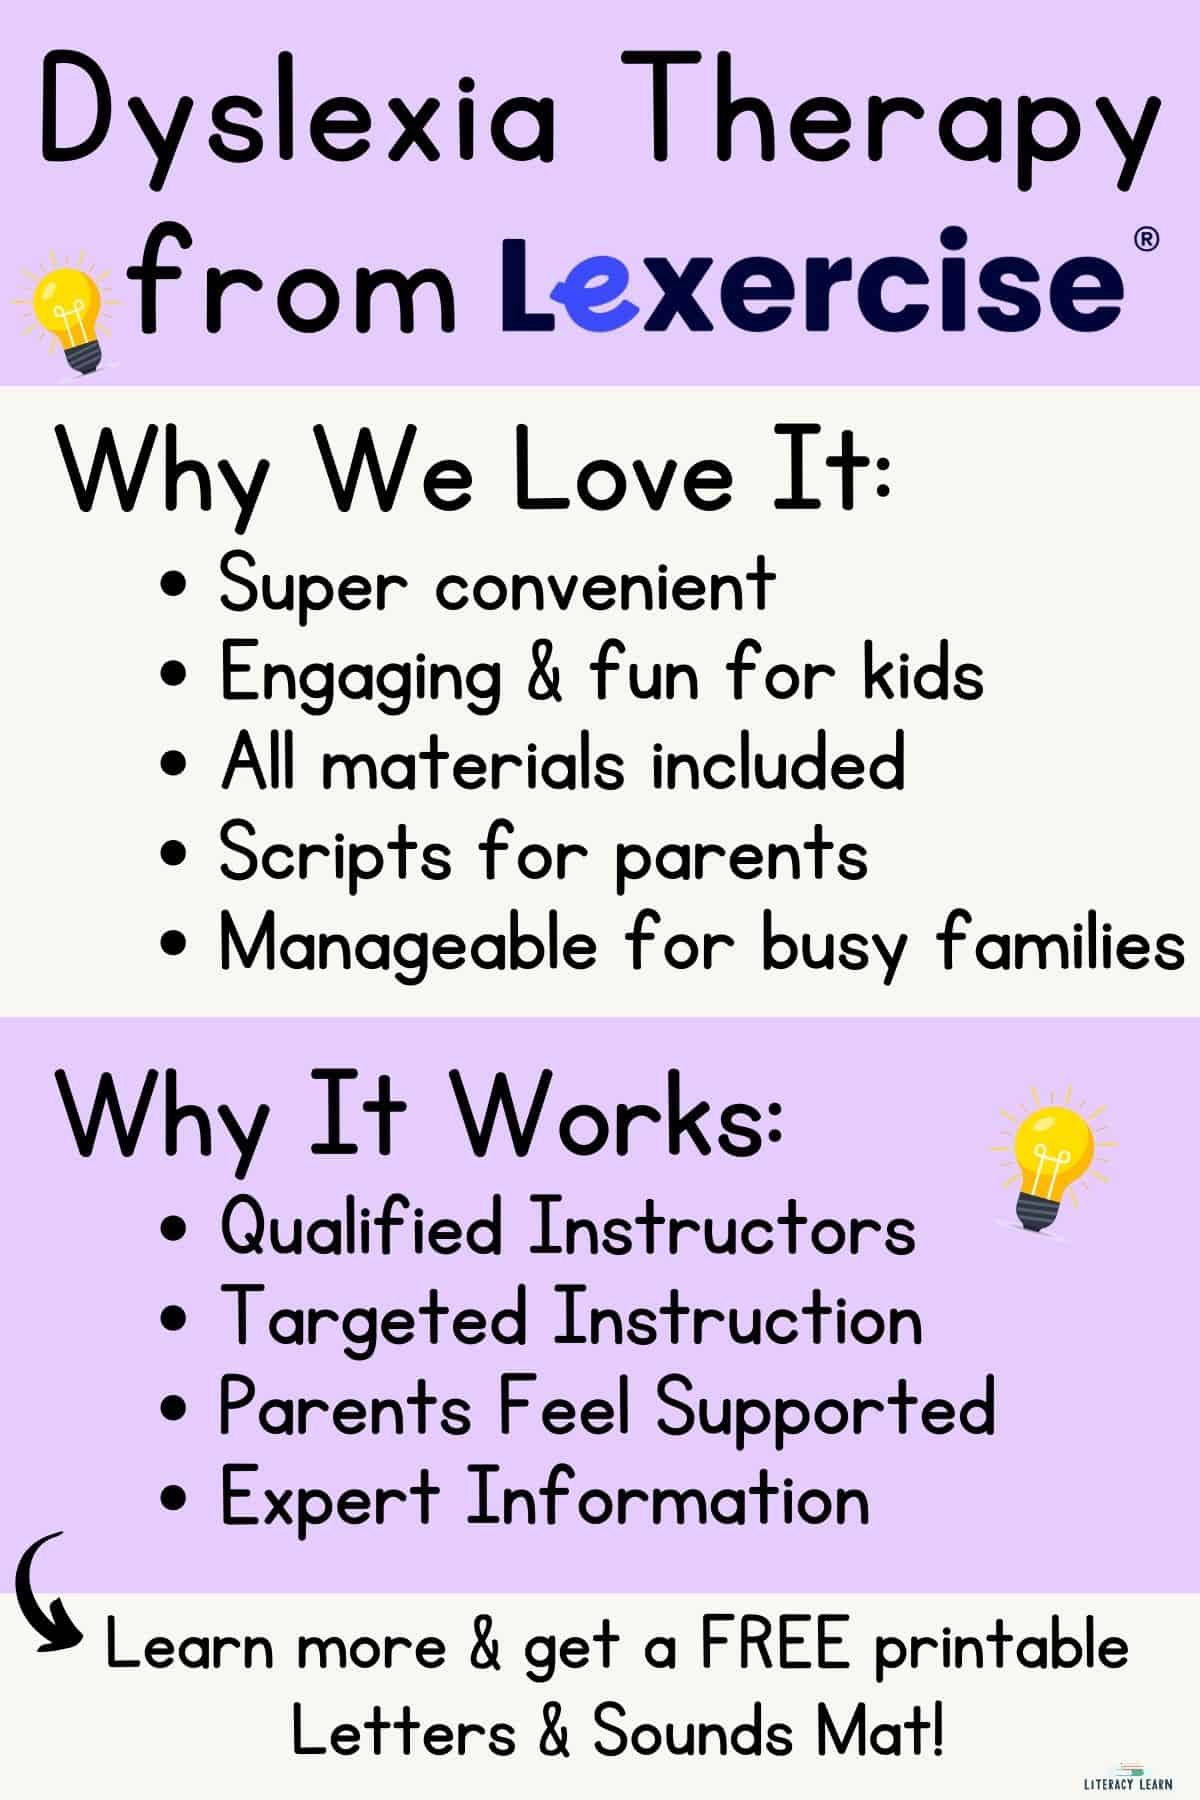 Infographic with bullet points explaining the benefits and reasons Lexercise Dyslexia tutoring works.